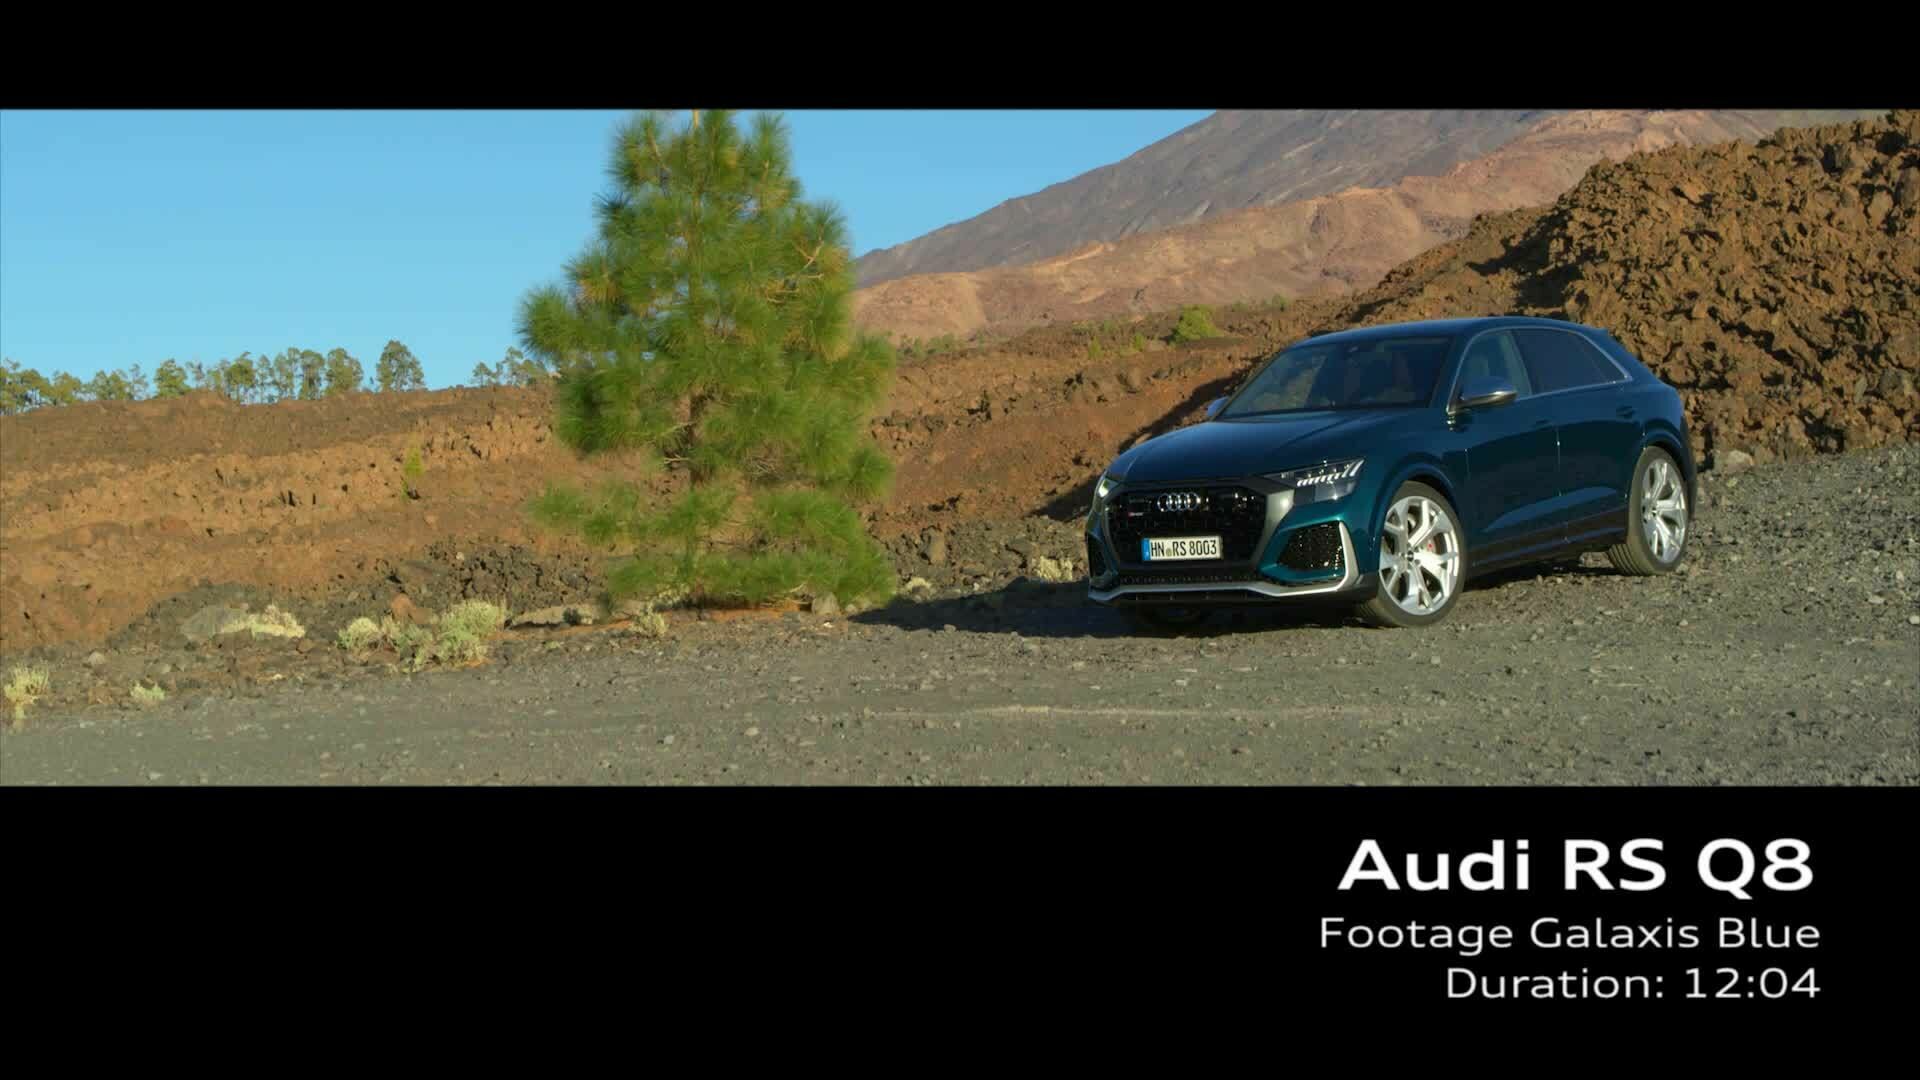 Audi RS Q8 on Location Galaxis Blue (Footage)